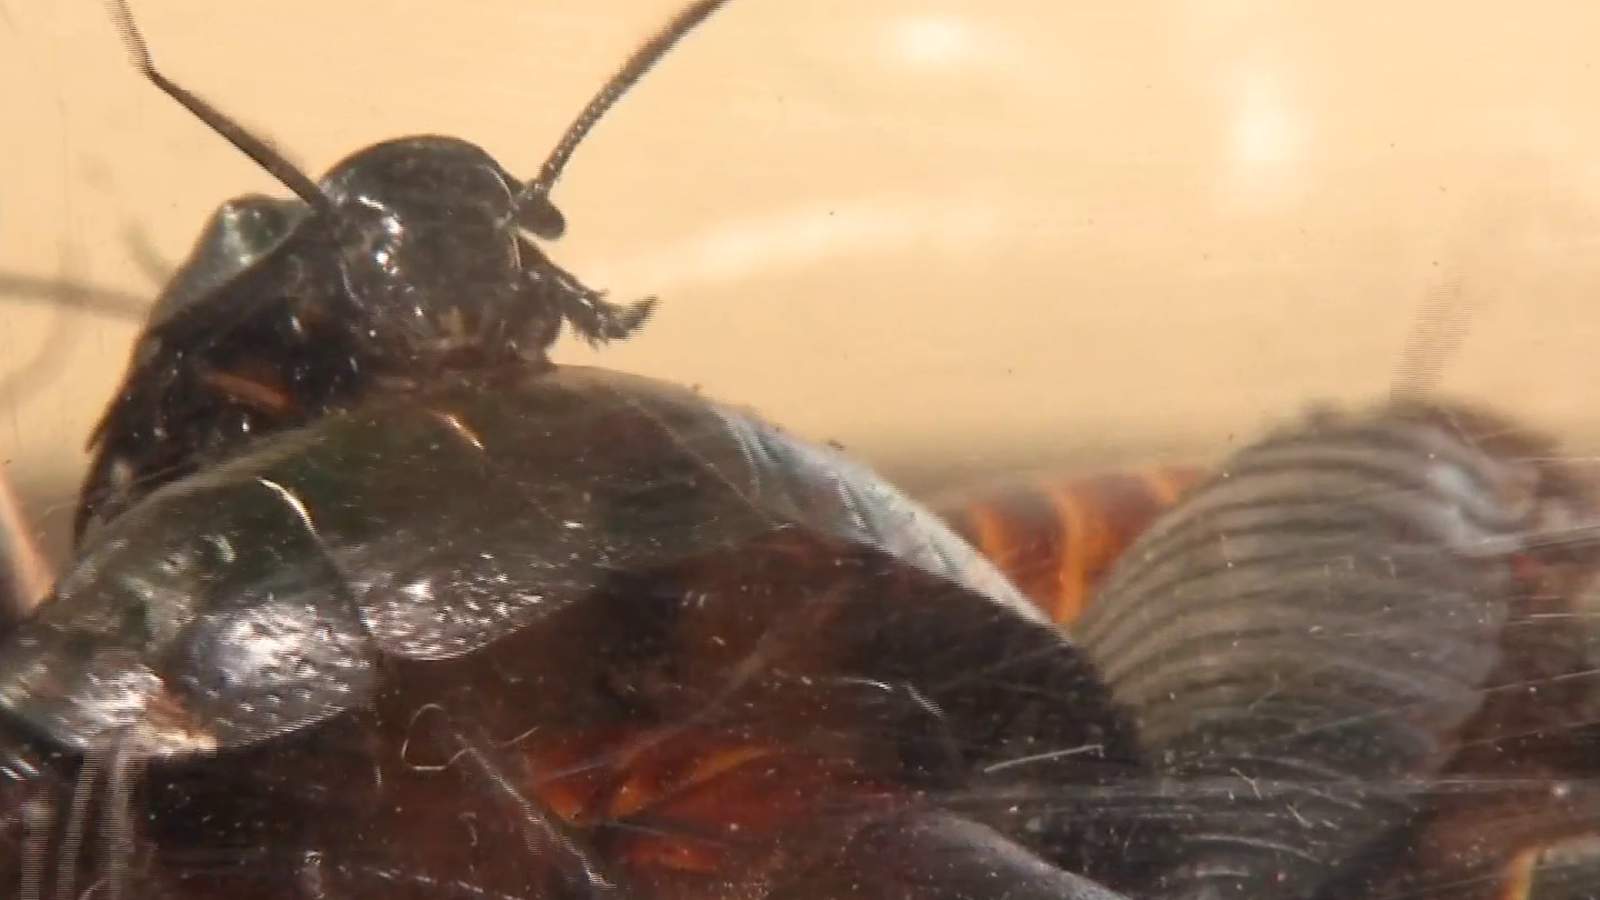 Ultimate Valentine’s Day gift? Name a cockroach after that ‘special’ someone